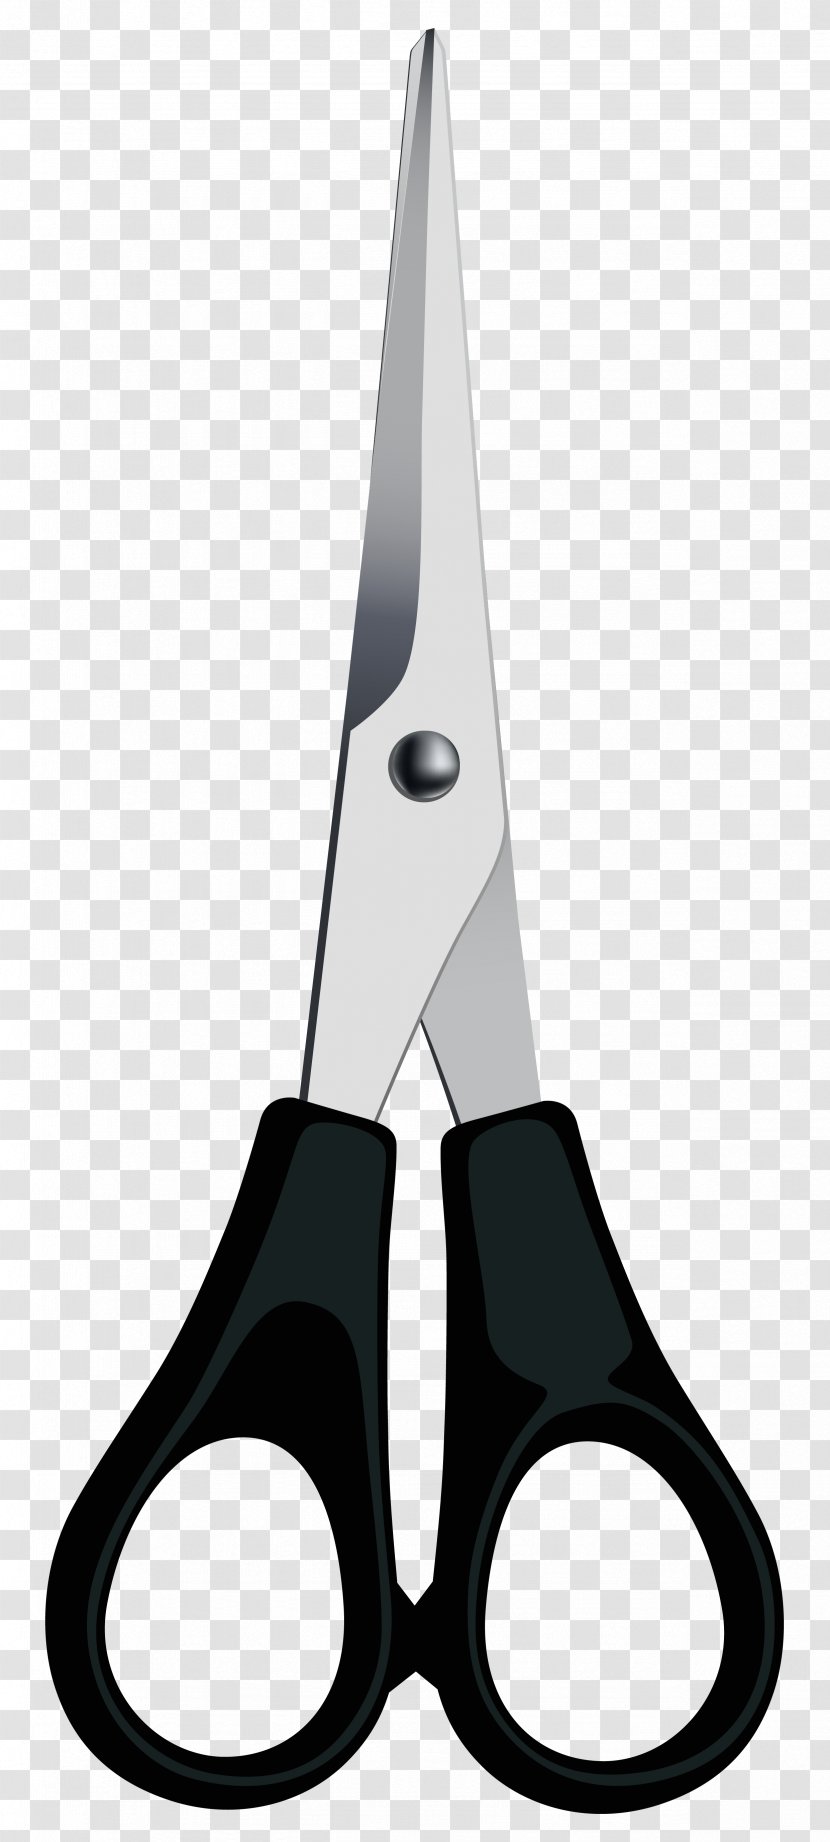 Scissors Cutting Tool Handle Material - Black And White - Clipart Image Transparent PNG